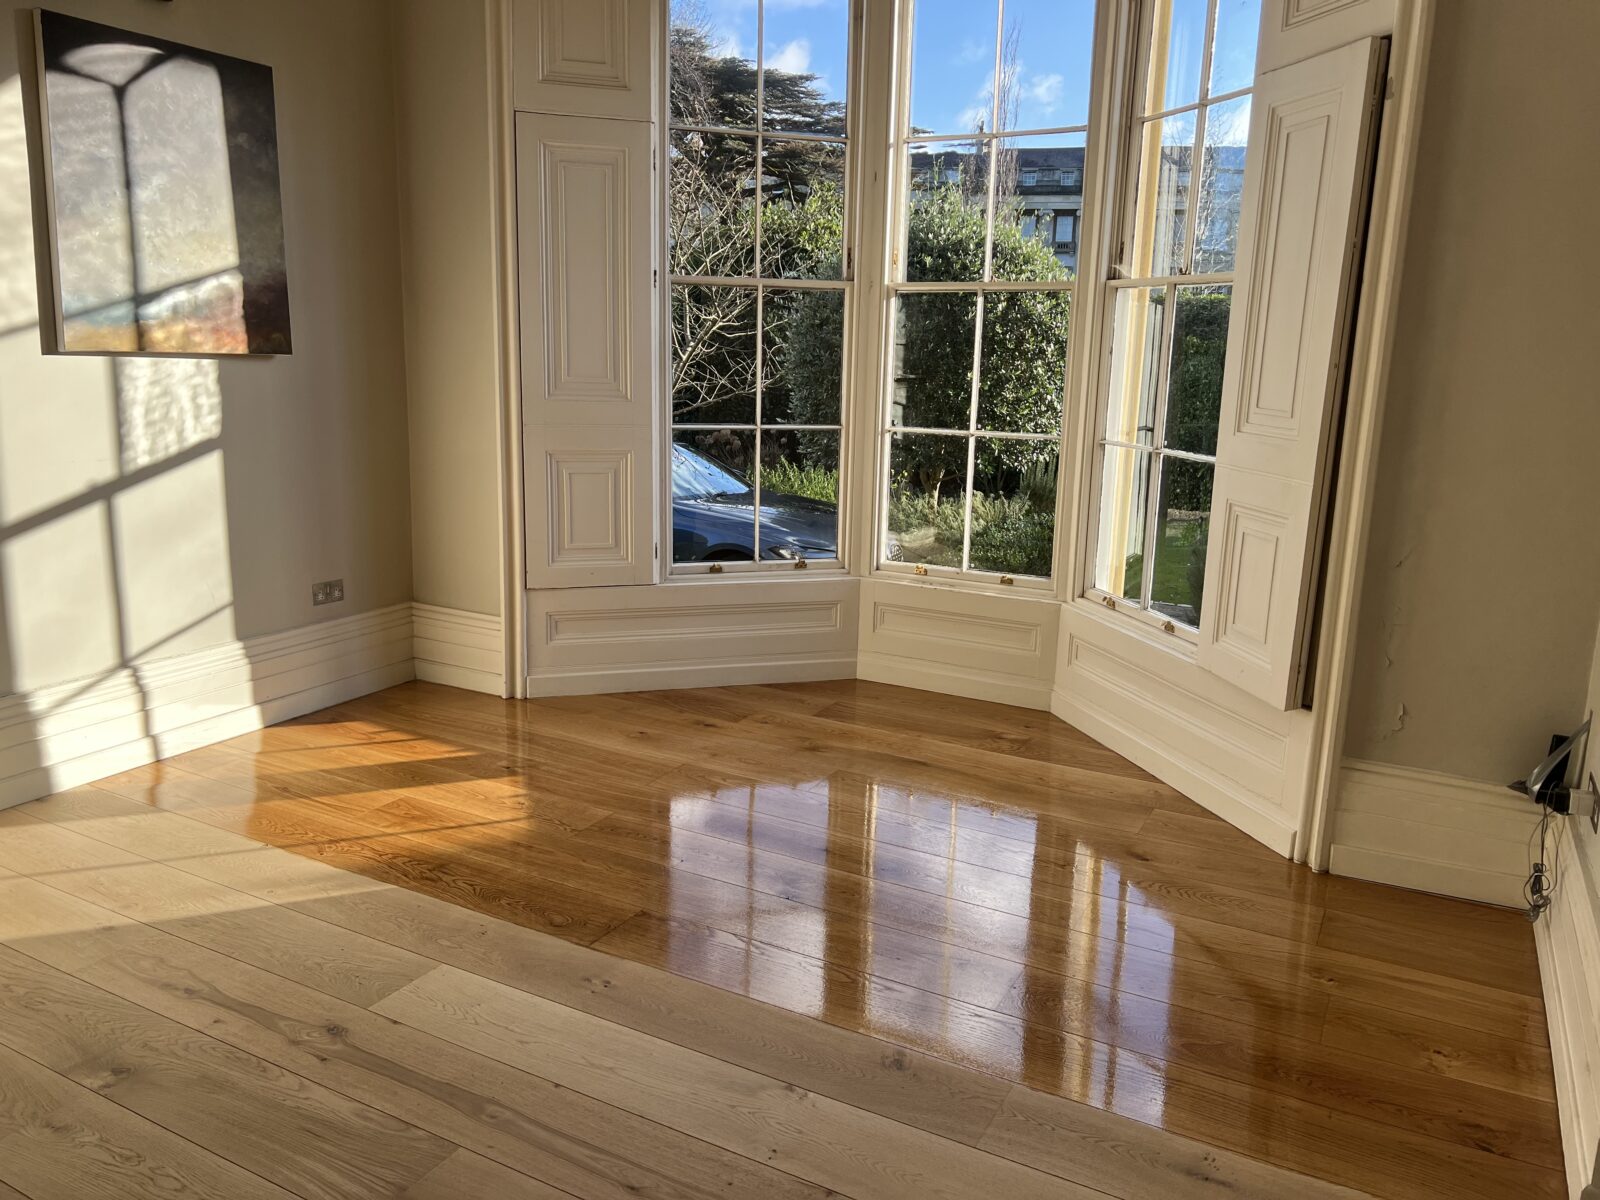 Floor sanding and refinishing at CLifton Park project